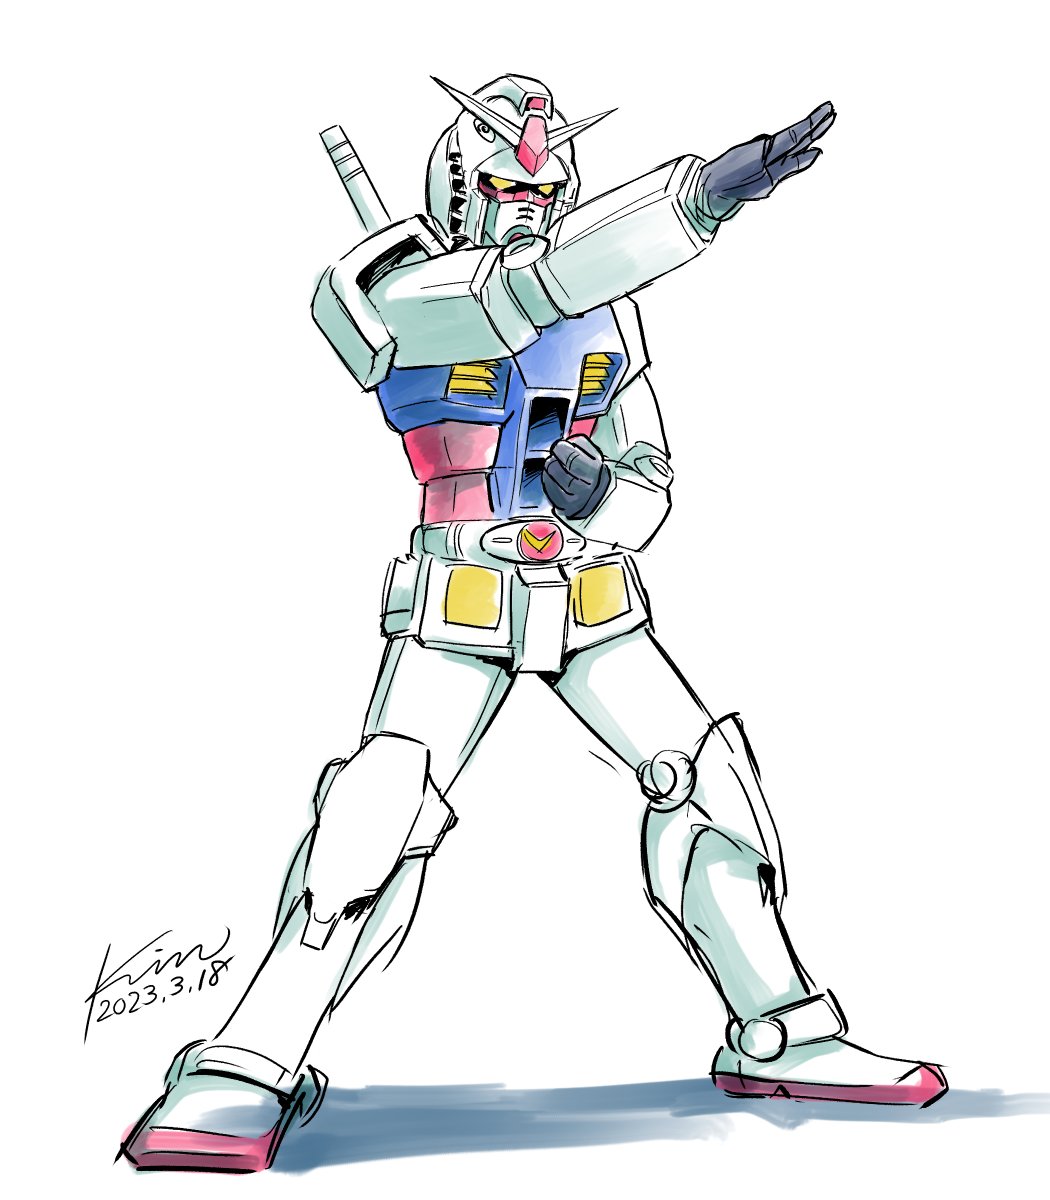 rx-78-2 v-fin robot solo mecha no humans white background dated  illustration images